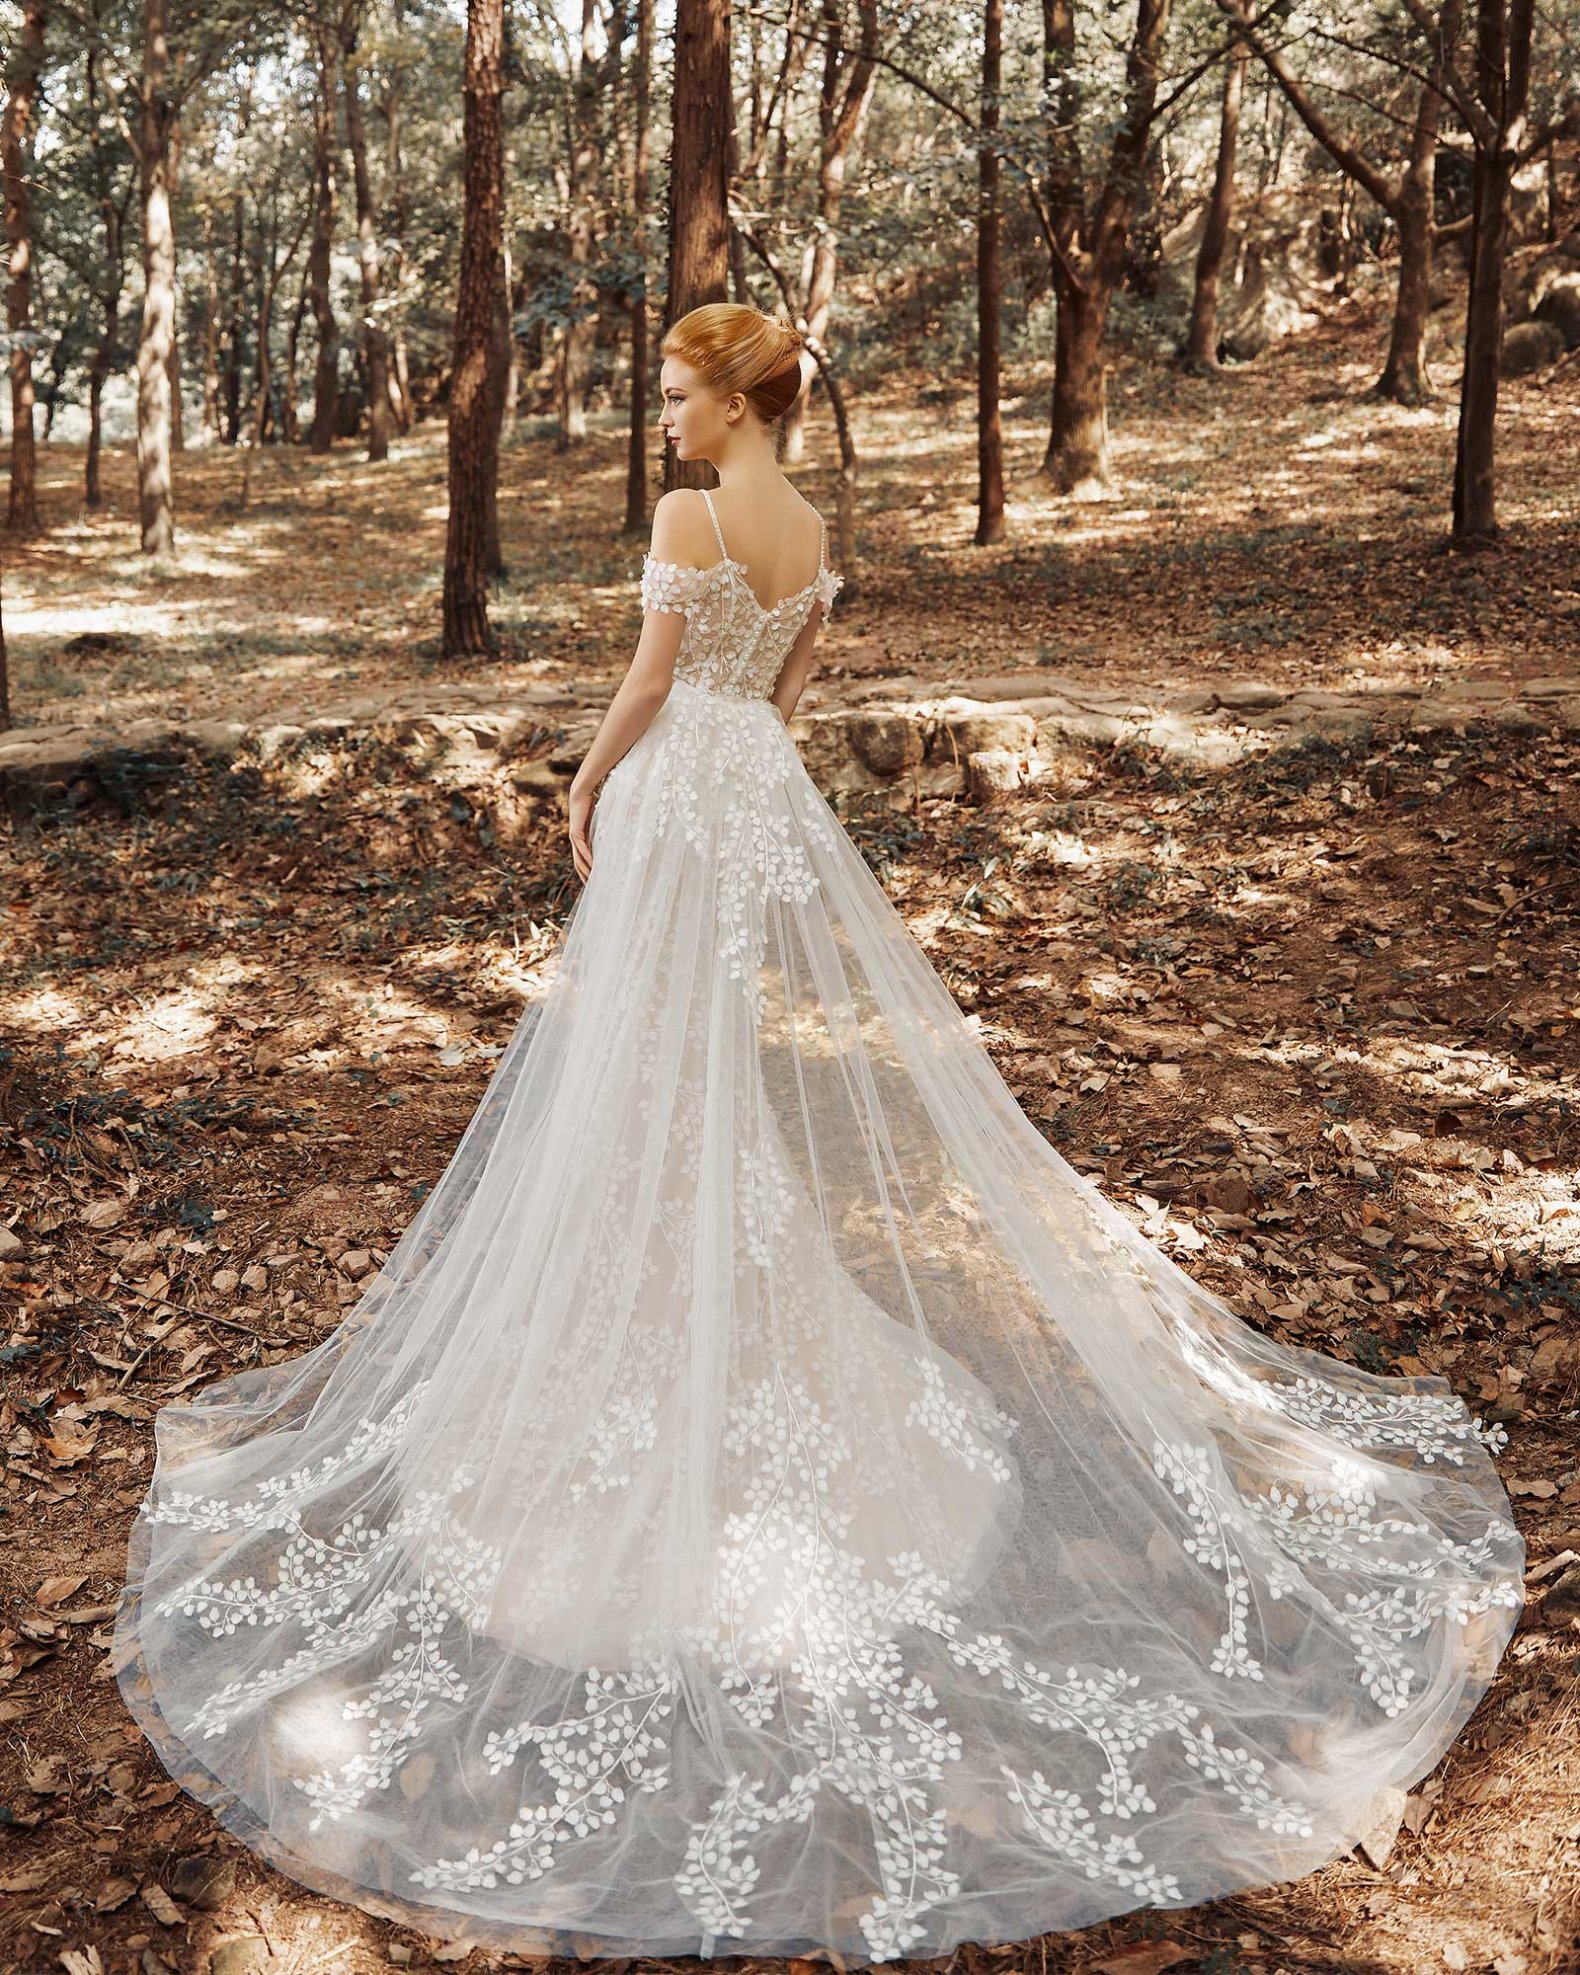 Introducing Cocomelody Fall/Winter 2020 Bridal Collection | Cocomelody Mag